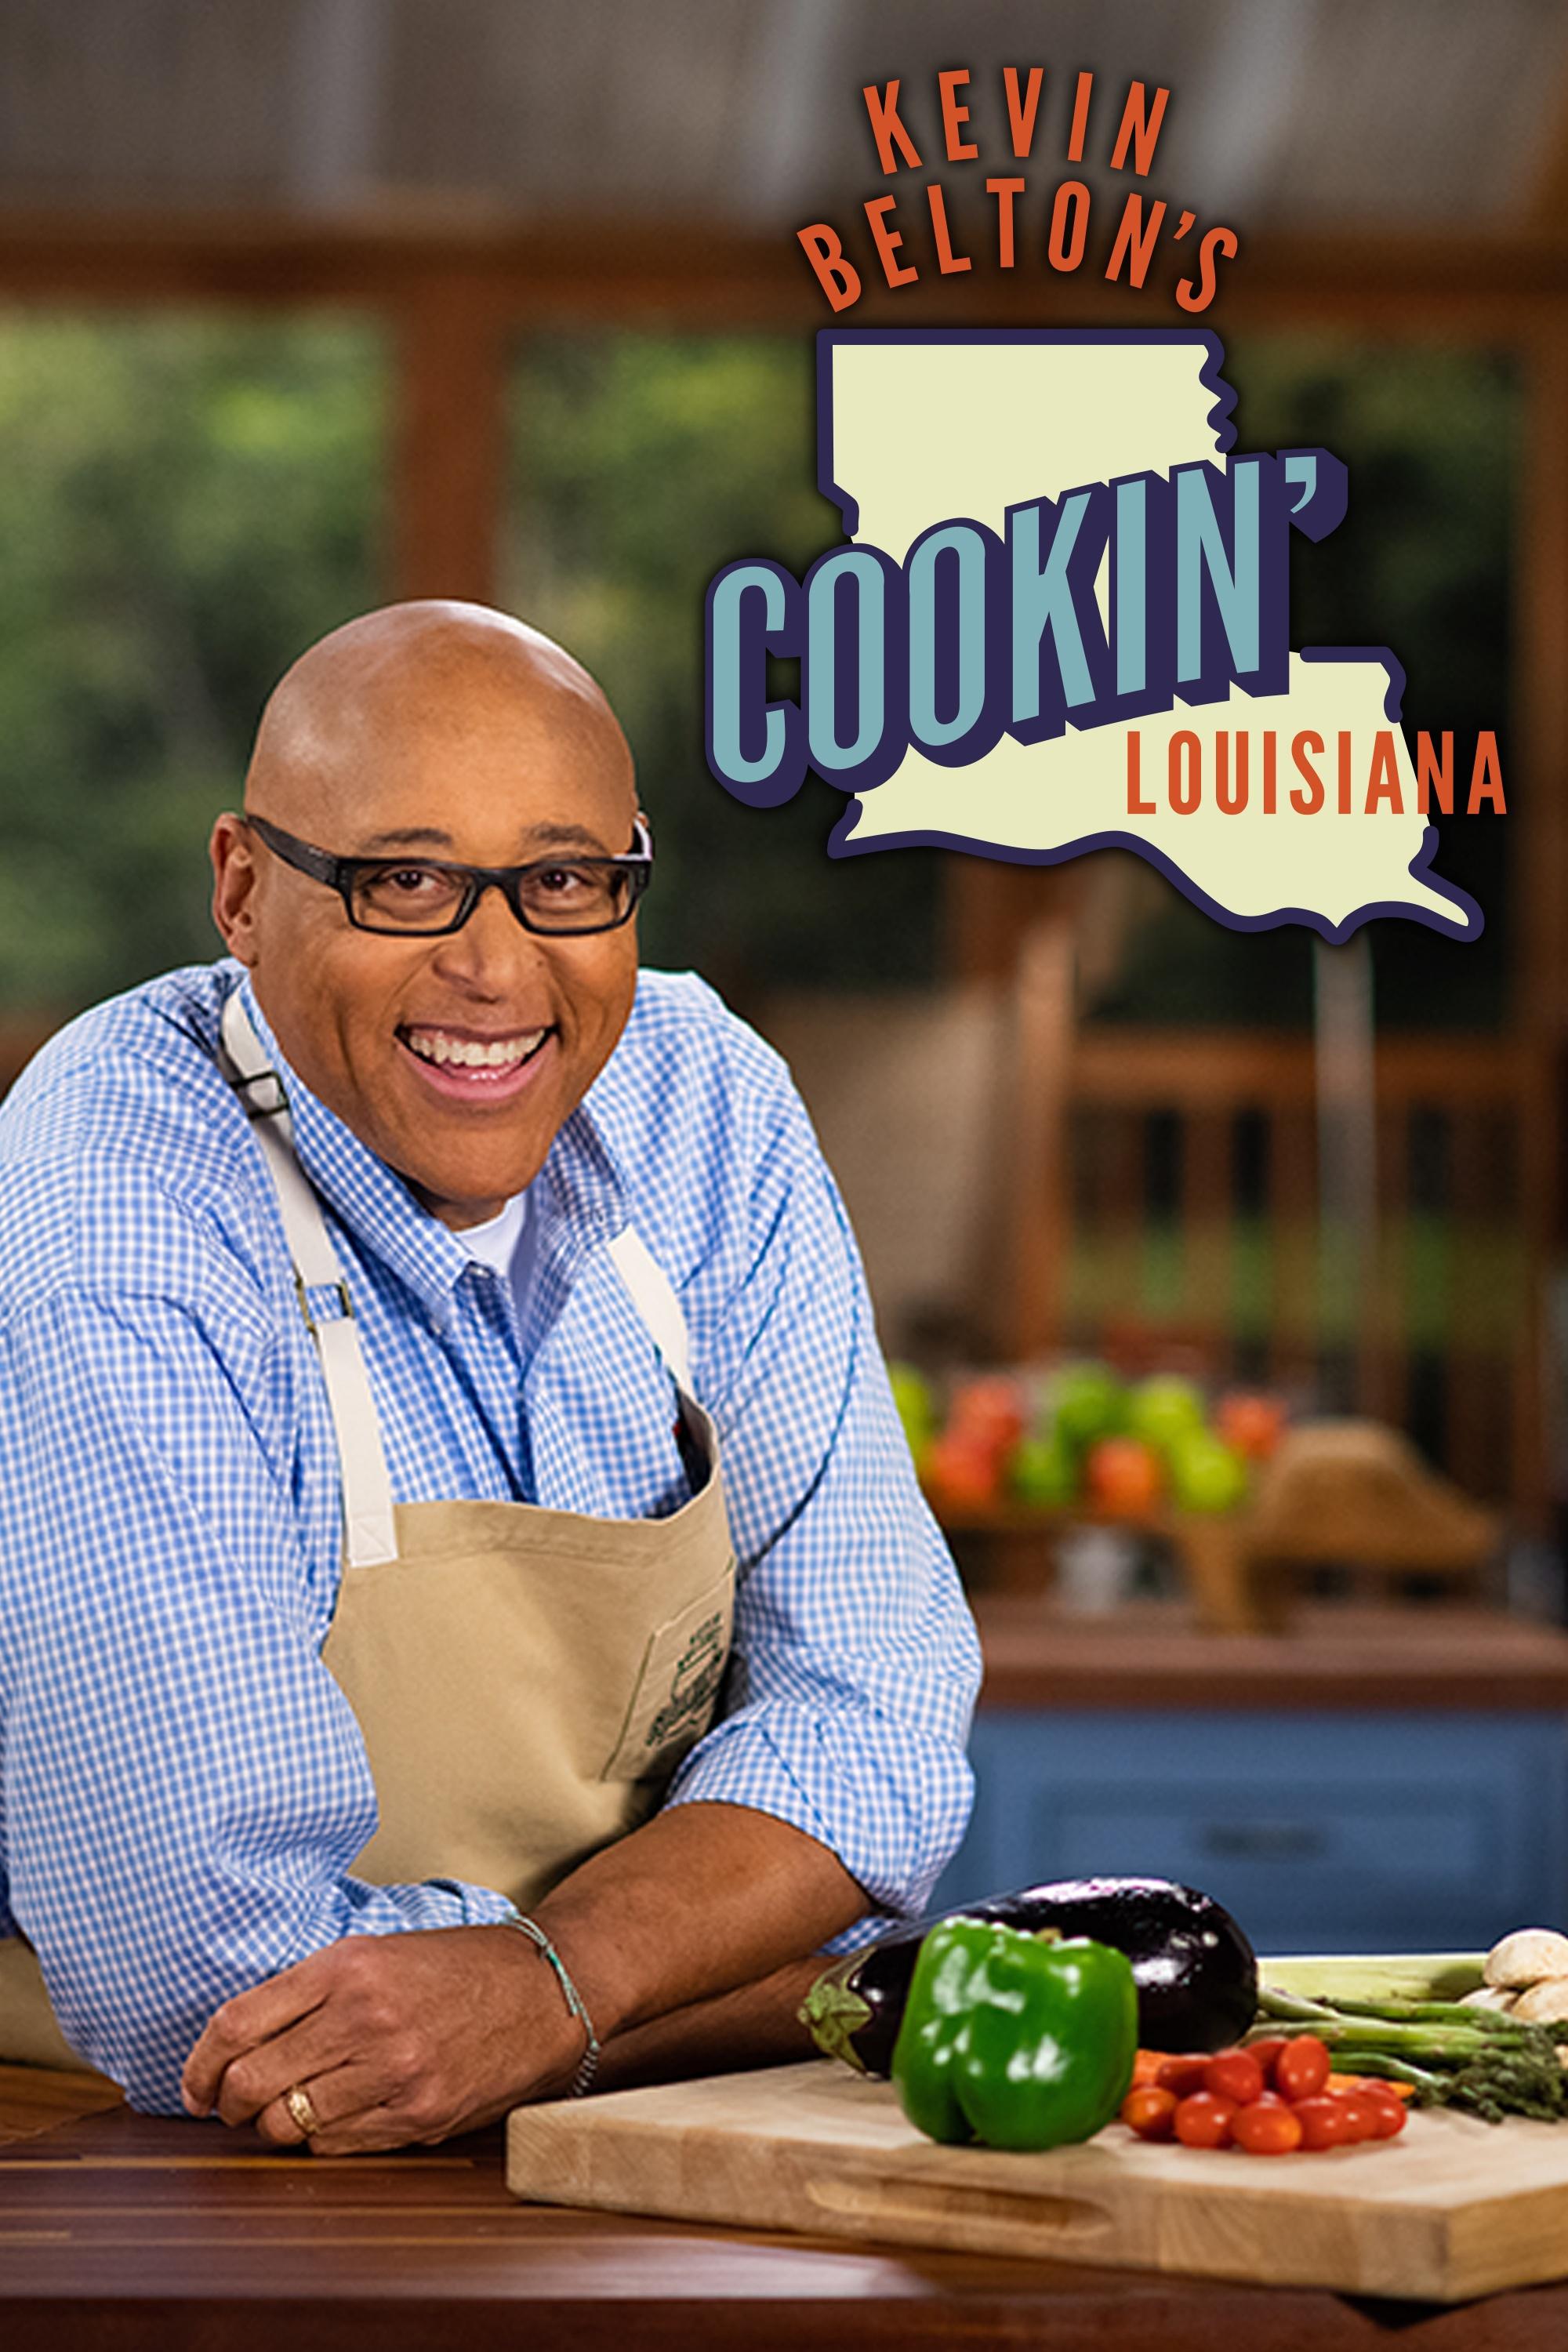 Grab a cookbook and join chef Kevin Belton in his new TV show